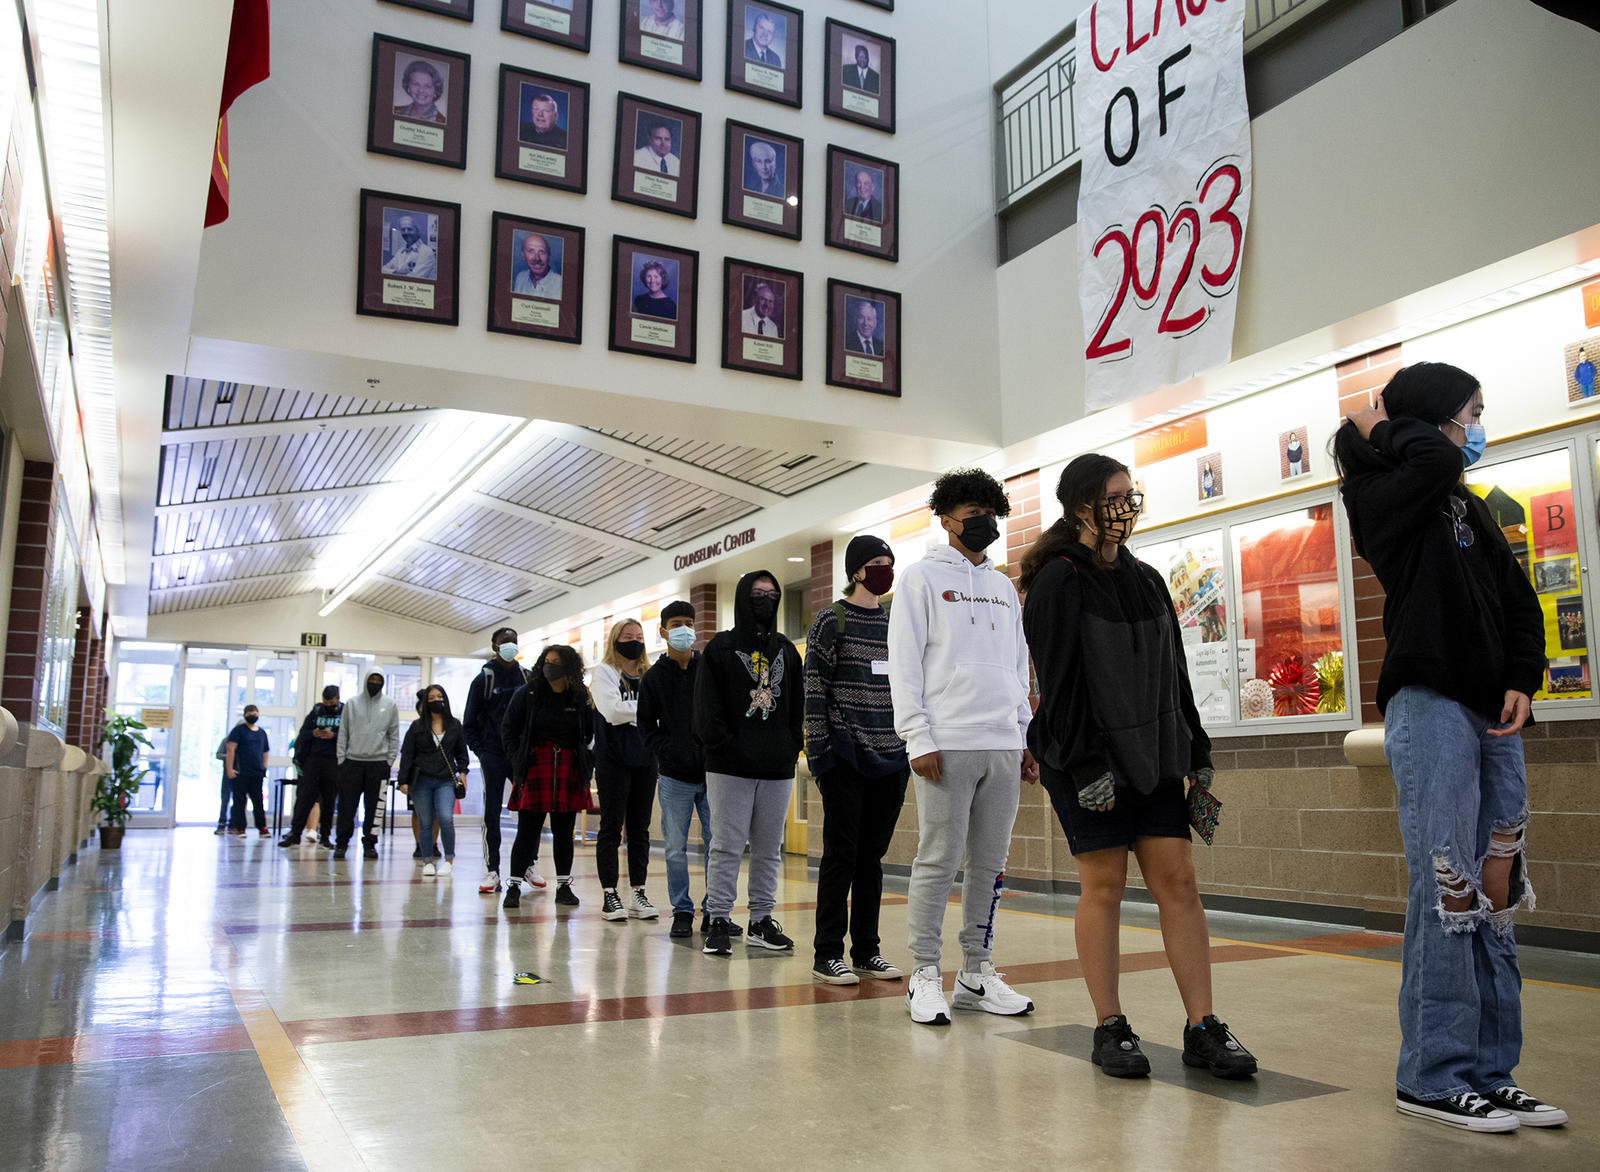 Kids in a line in a school hallway. A banner overhead reads "Class of 2023"